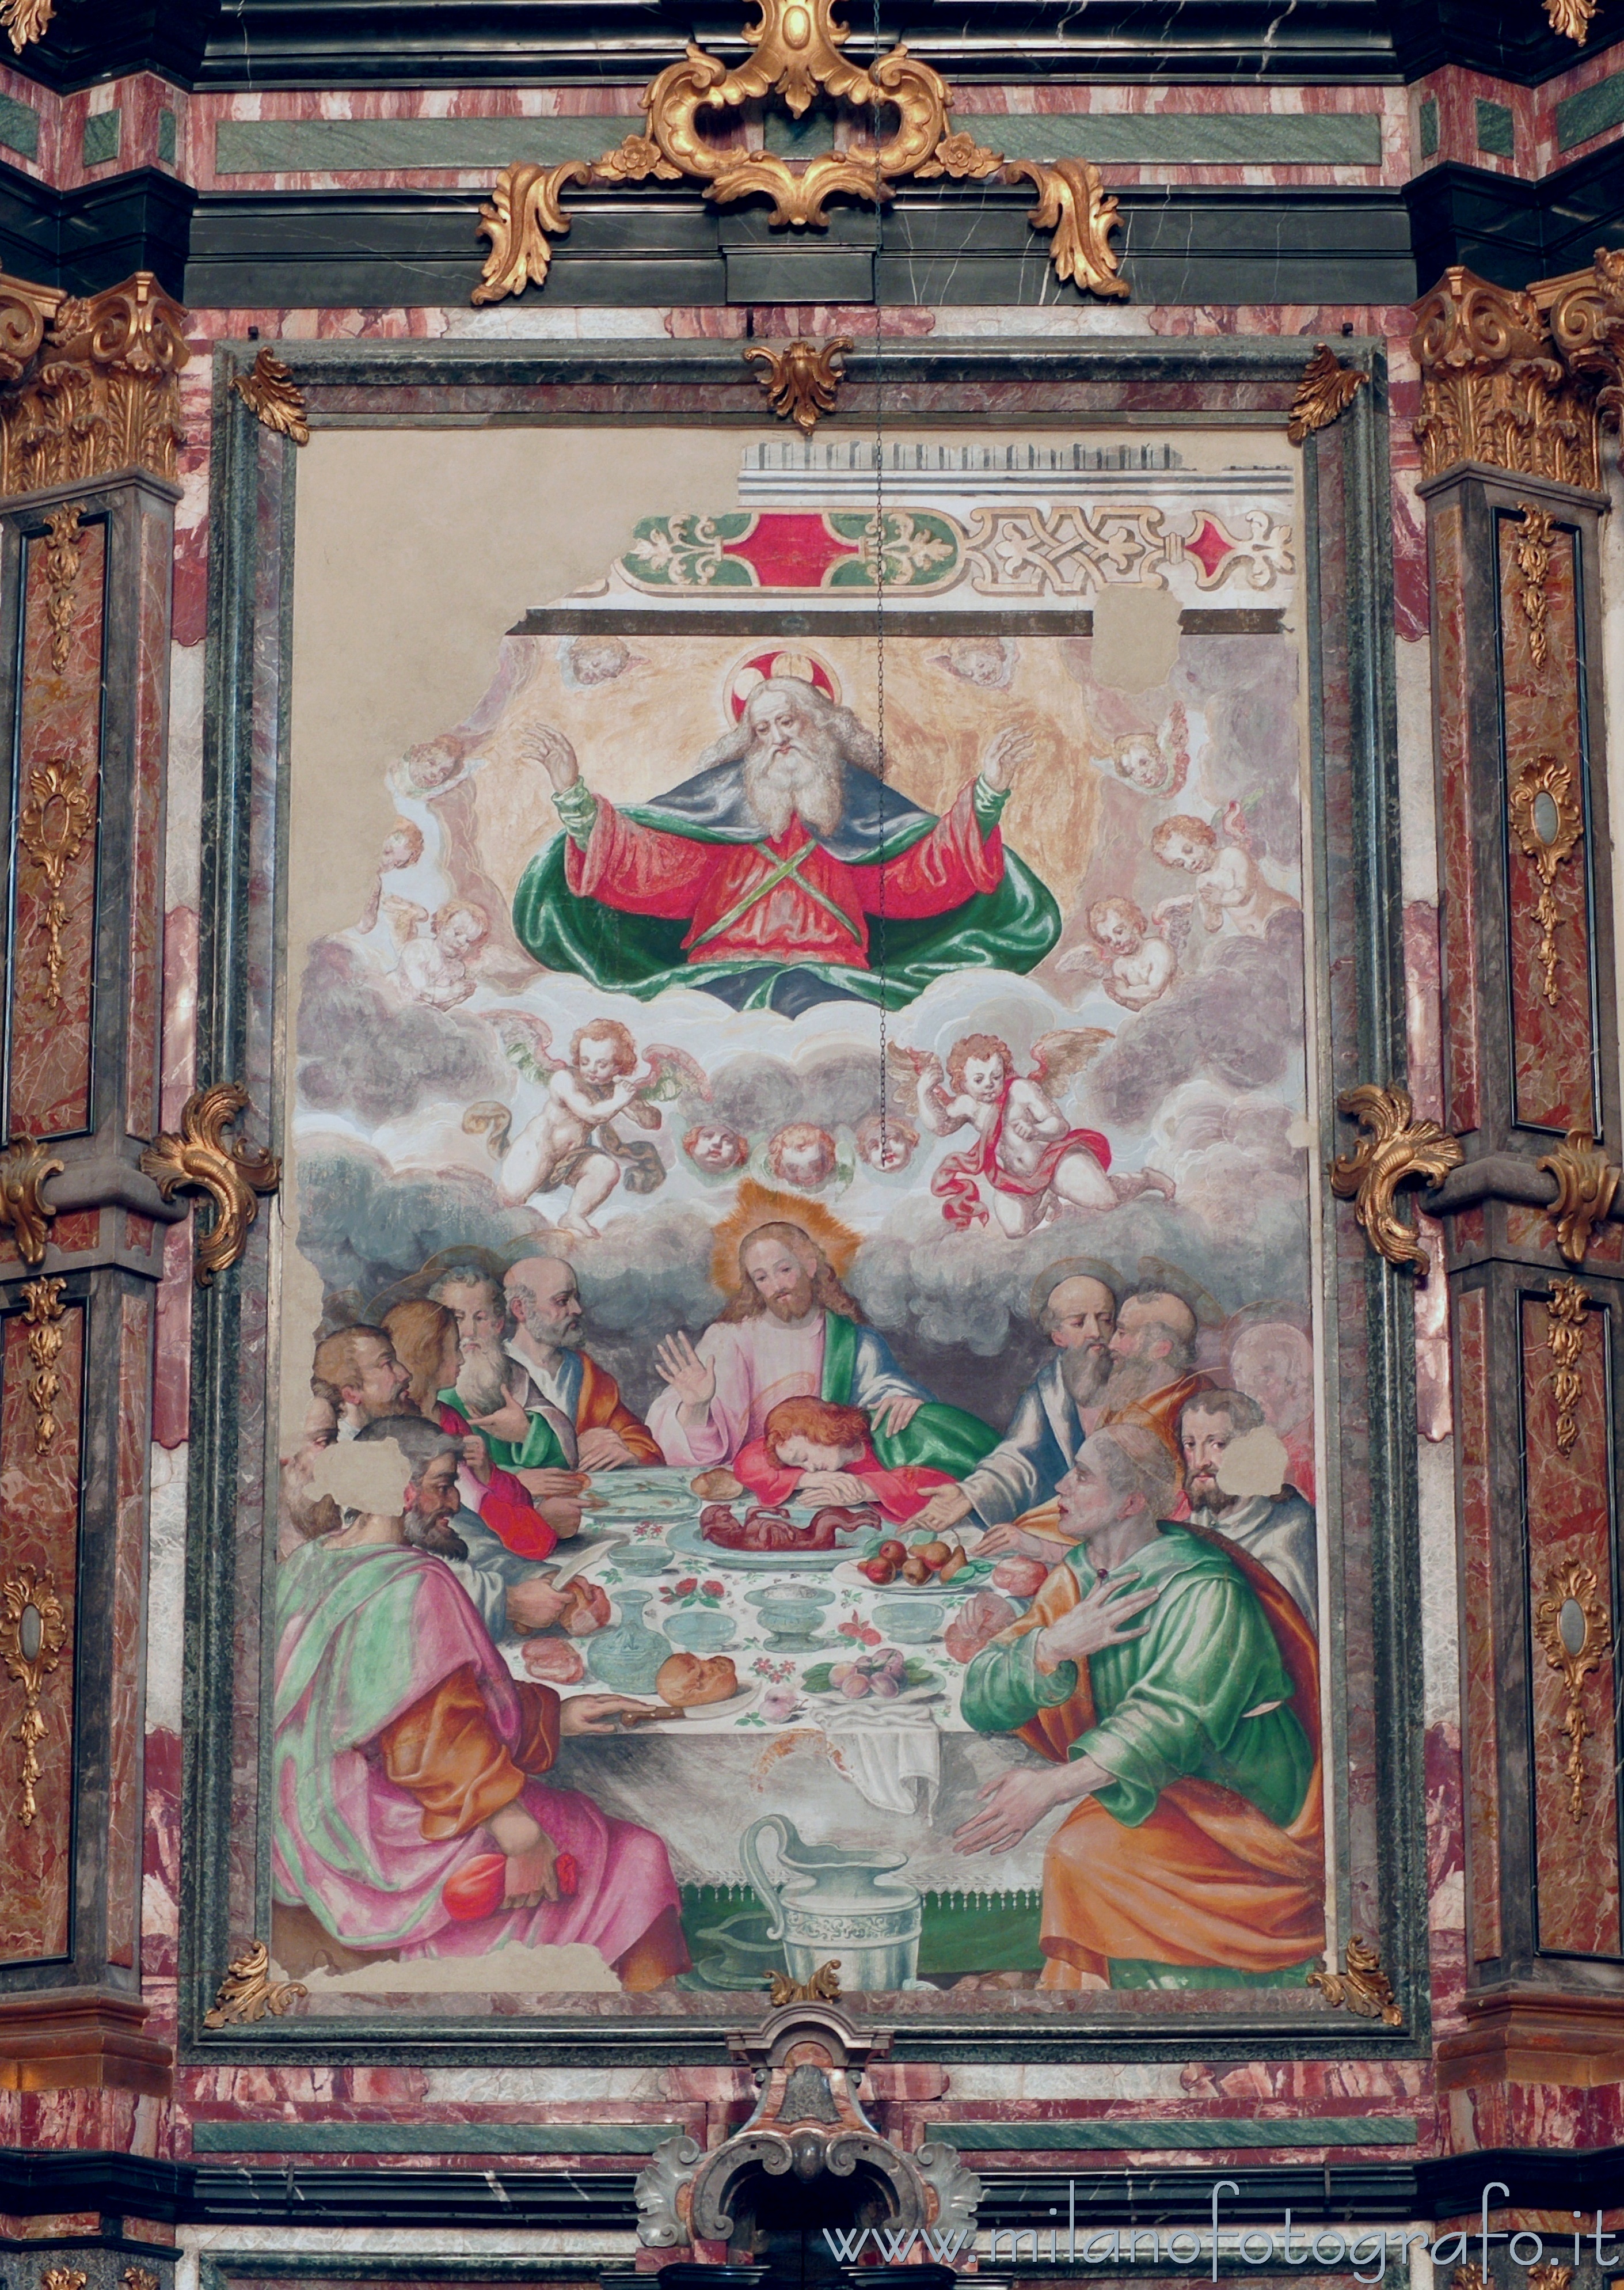 Besana in Brianza (Monza e Brianza, Italy): Last supper in the public Church of Sts. Peter and Paul of the Former Benedictine Monastery of Brugora - Besana in Brianza (Monza e Brianza, Italy)